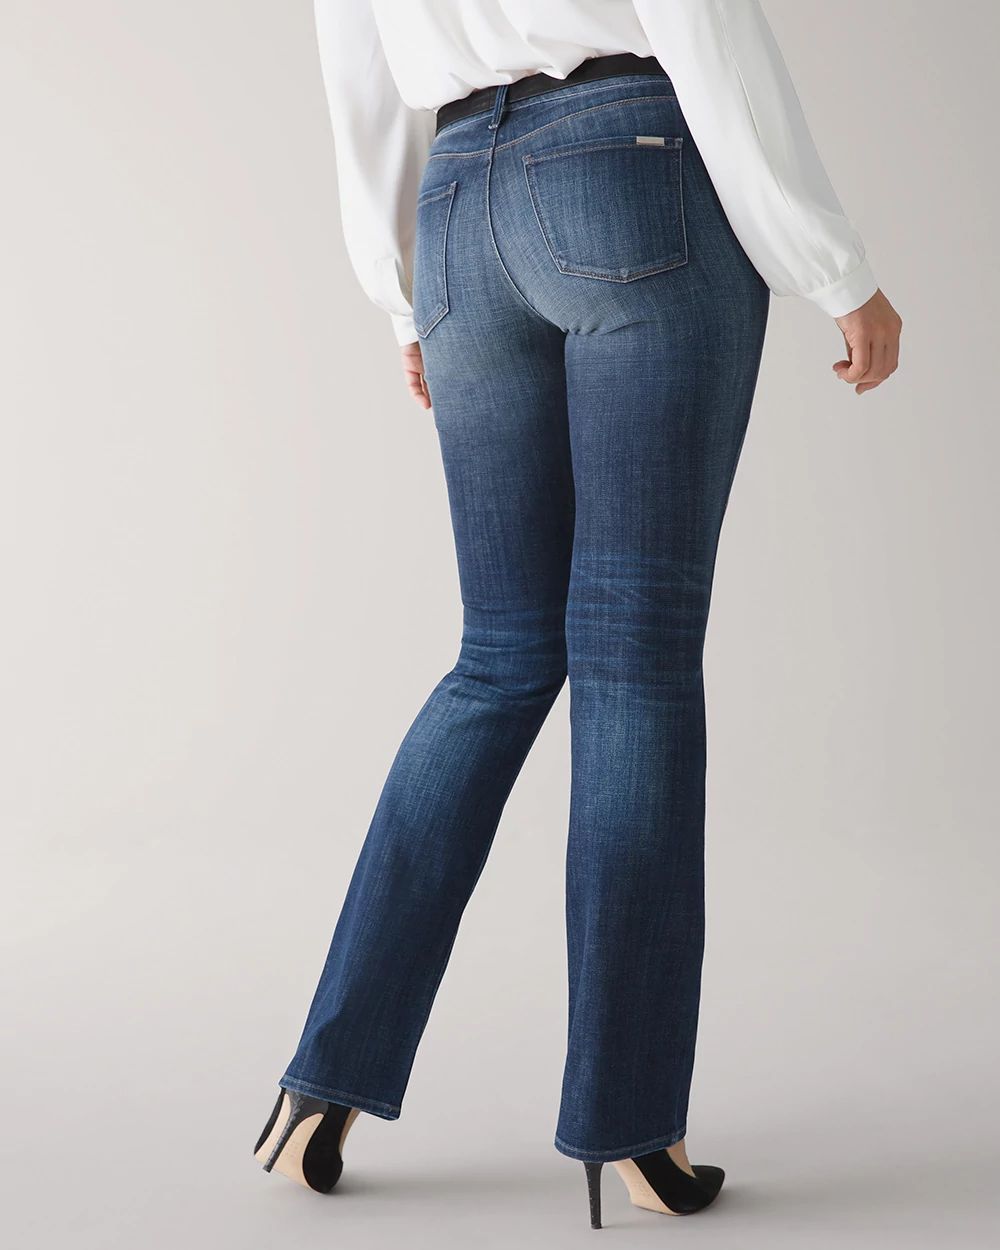 Curvy-Fit Mid-Rise Everyday Soft Denim Bootcut Jeans click to view larger image.